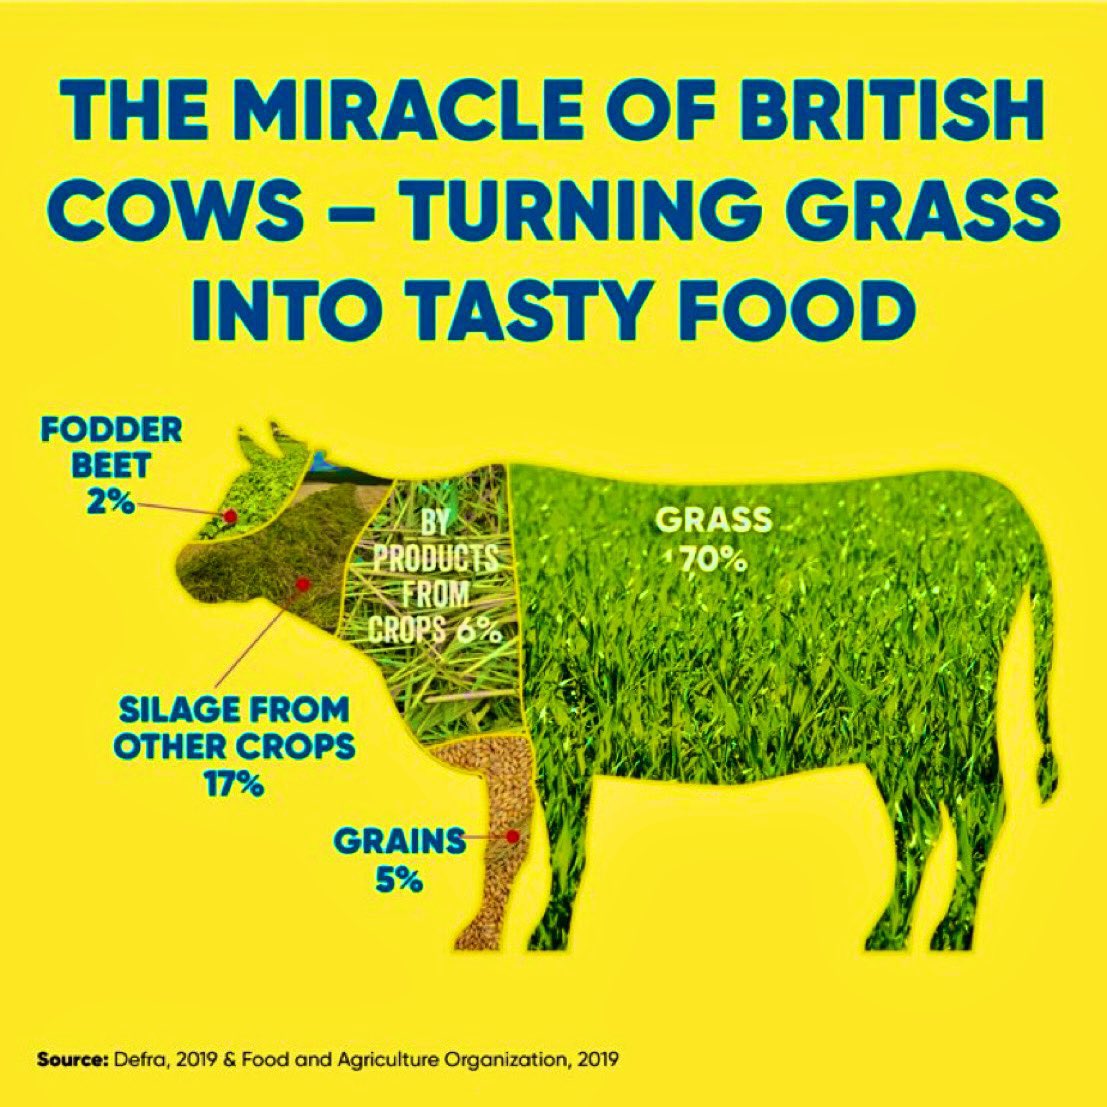 The miracle of British cows 🐄 🇬🇧